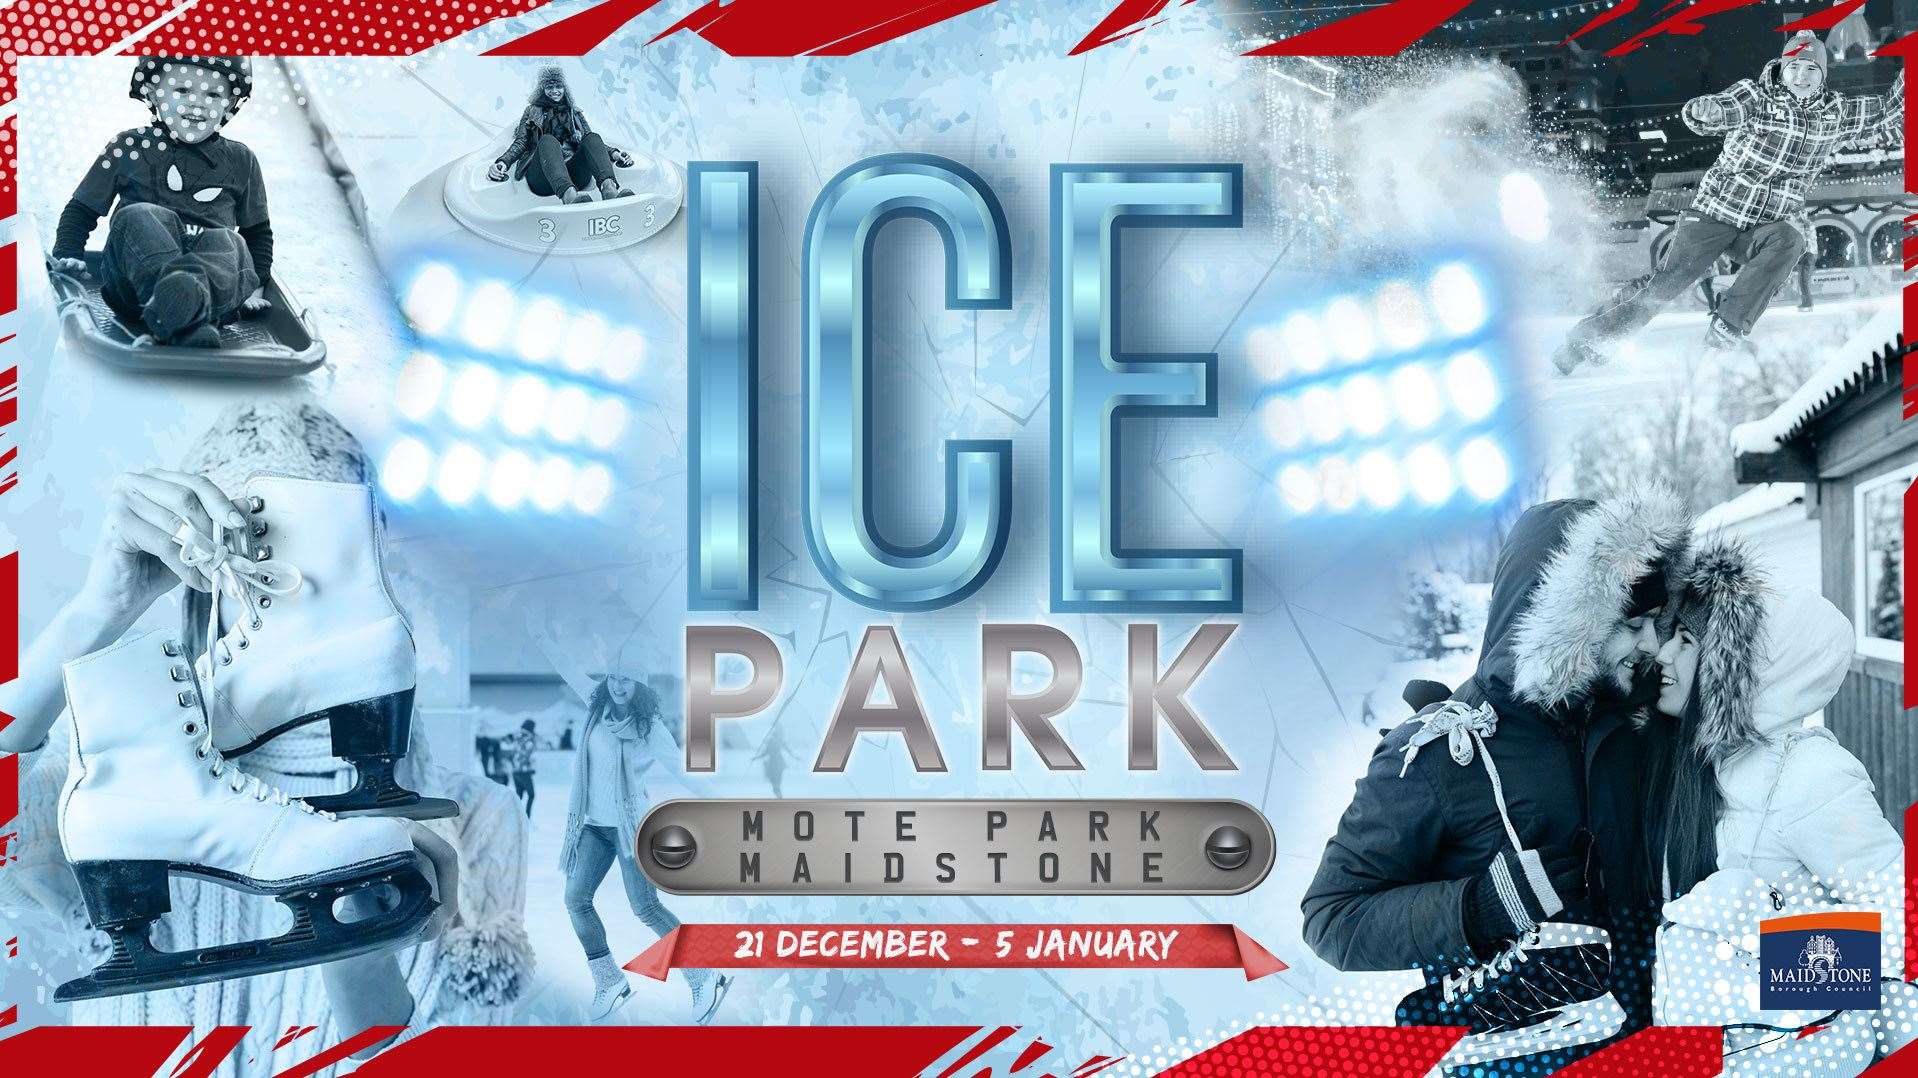 The Ice Park was set to bring Winter Wonderland inspired festivies to Maidstone